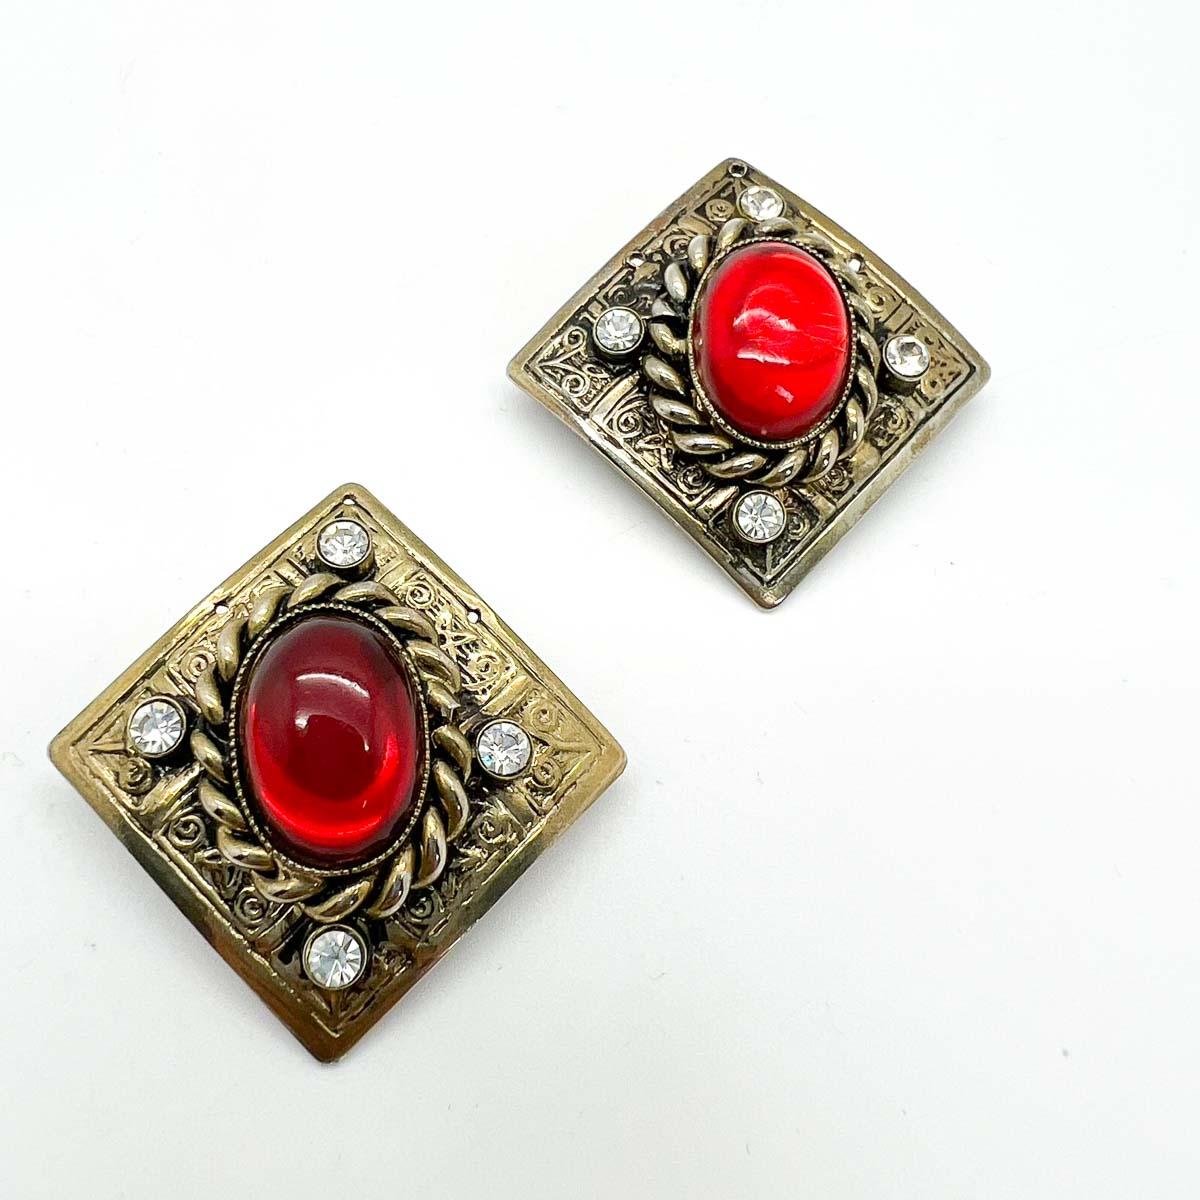 A wonderful pair of Vintage Silver & Ruby Plaque Earrings. Chased panelling set with a rope twist design is topped with a large ruby red cabochon and a quad of mounted white chatons. A gloriously glamorous finish to your look.

Vintage Condition: